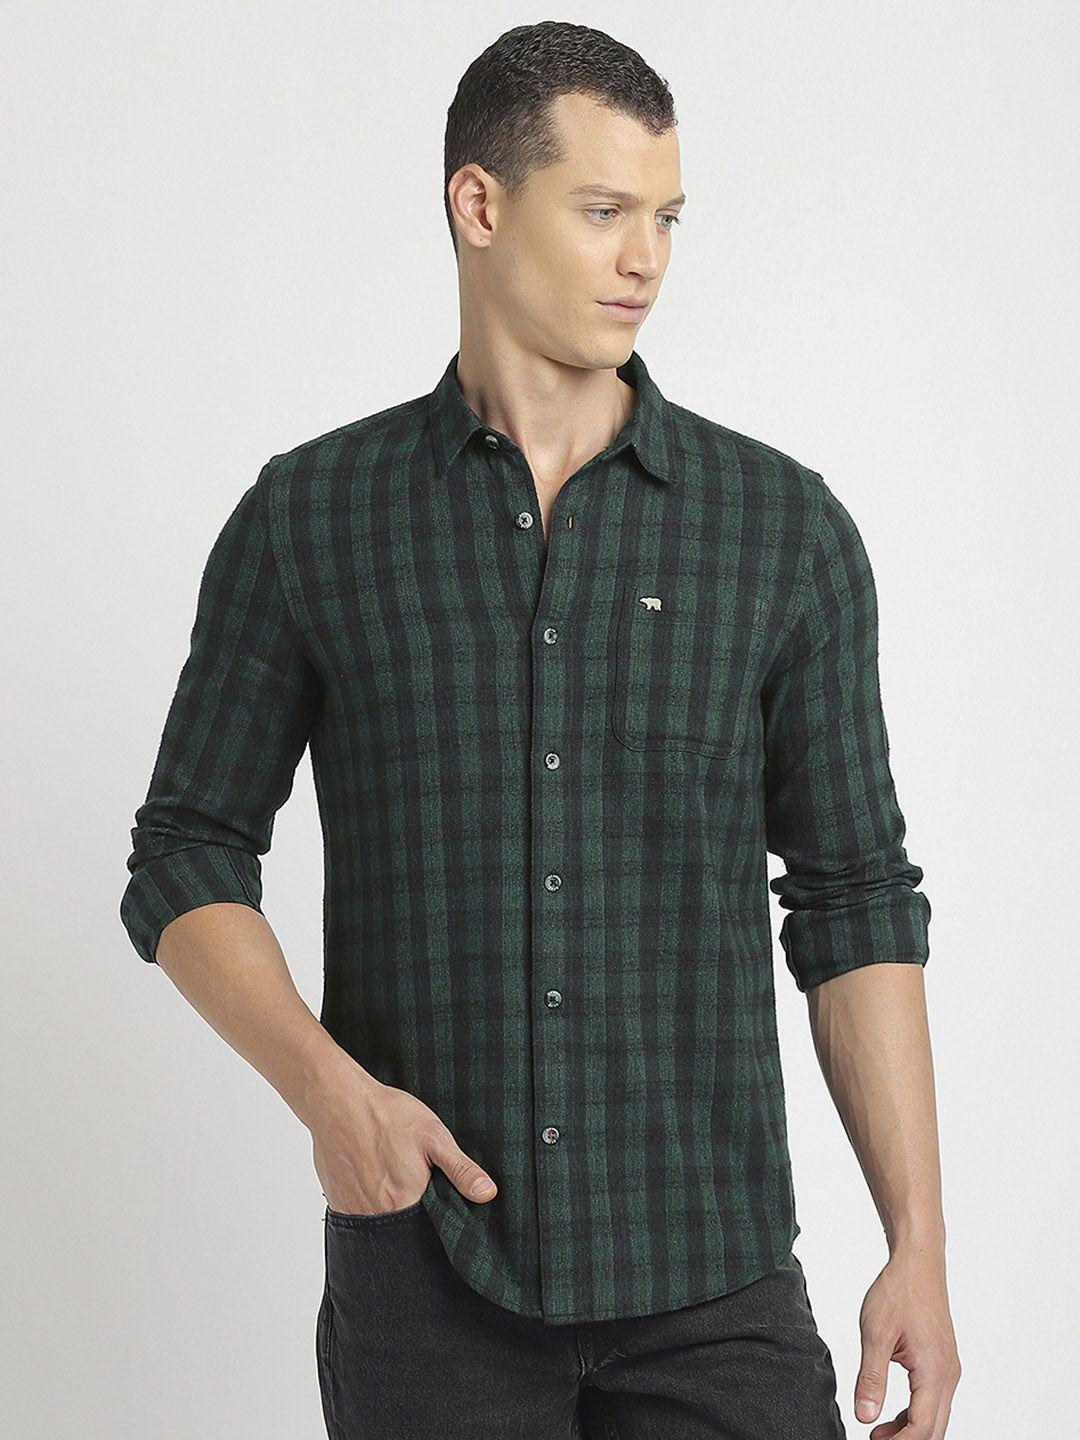 the-bear-house-slim-fit-tartan-checked-pure-cotton-casual-shirt